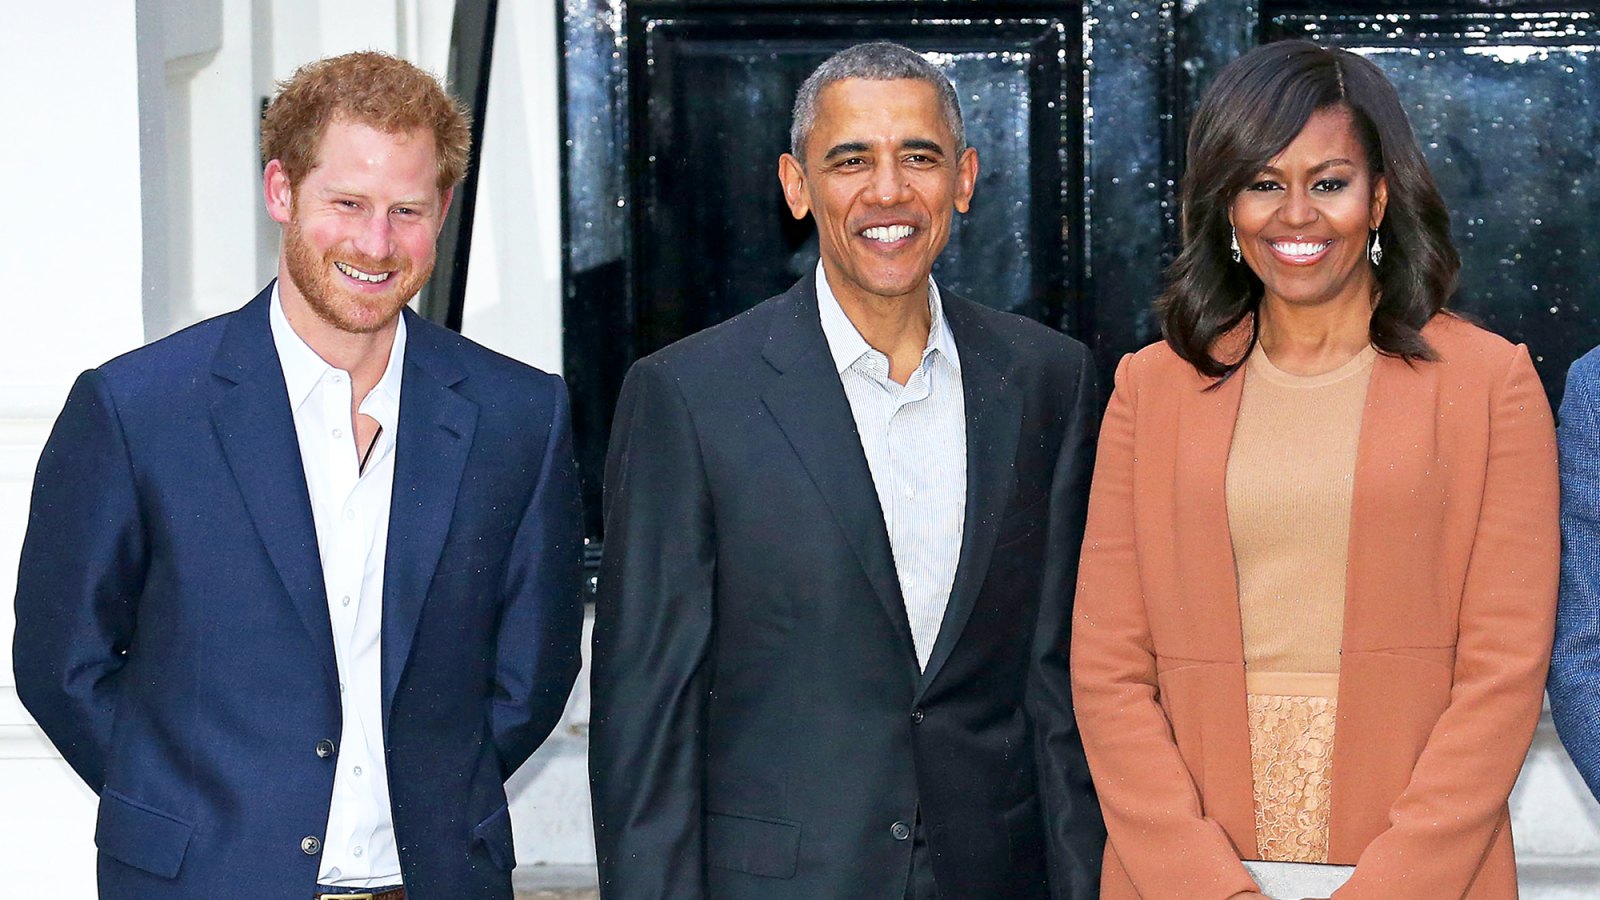 Prince Harry, Barack Obama and Michelle Obama attend a dinner at Kensington Palace on April 22, 2016 in London, England.